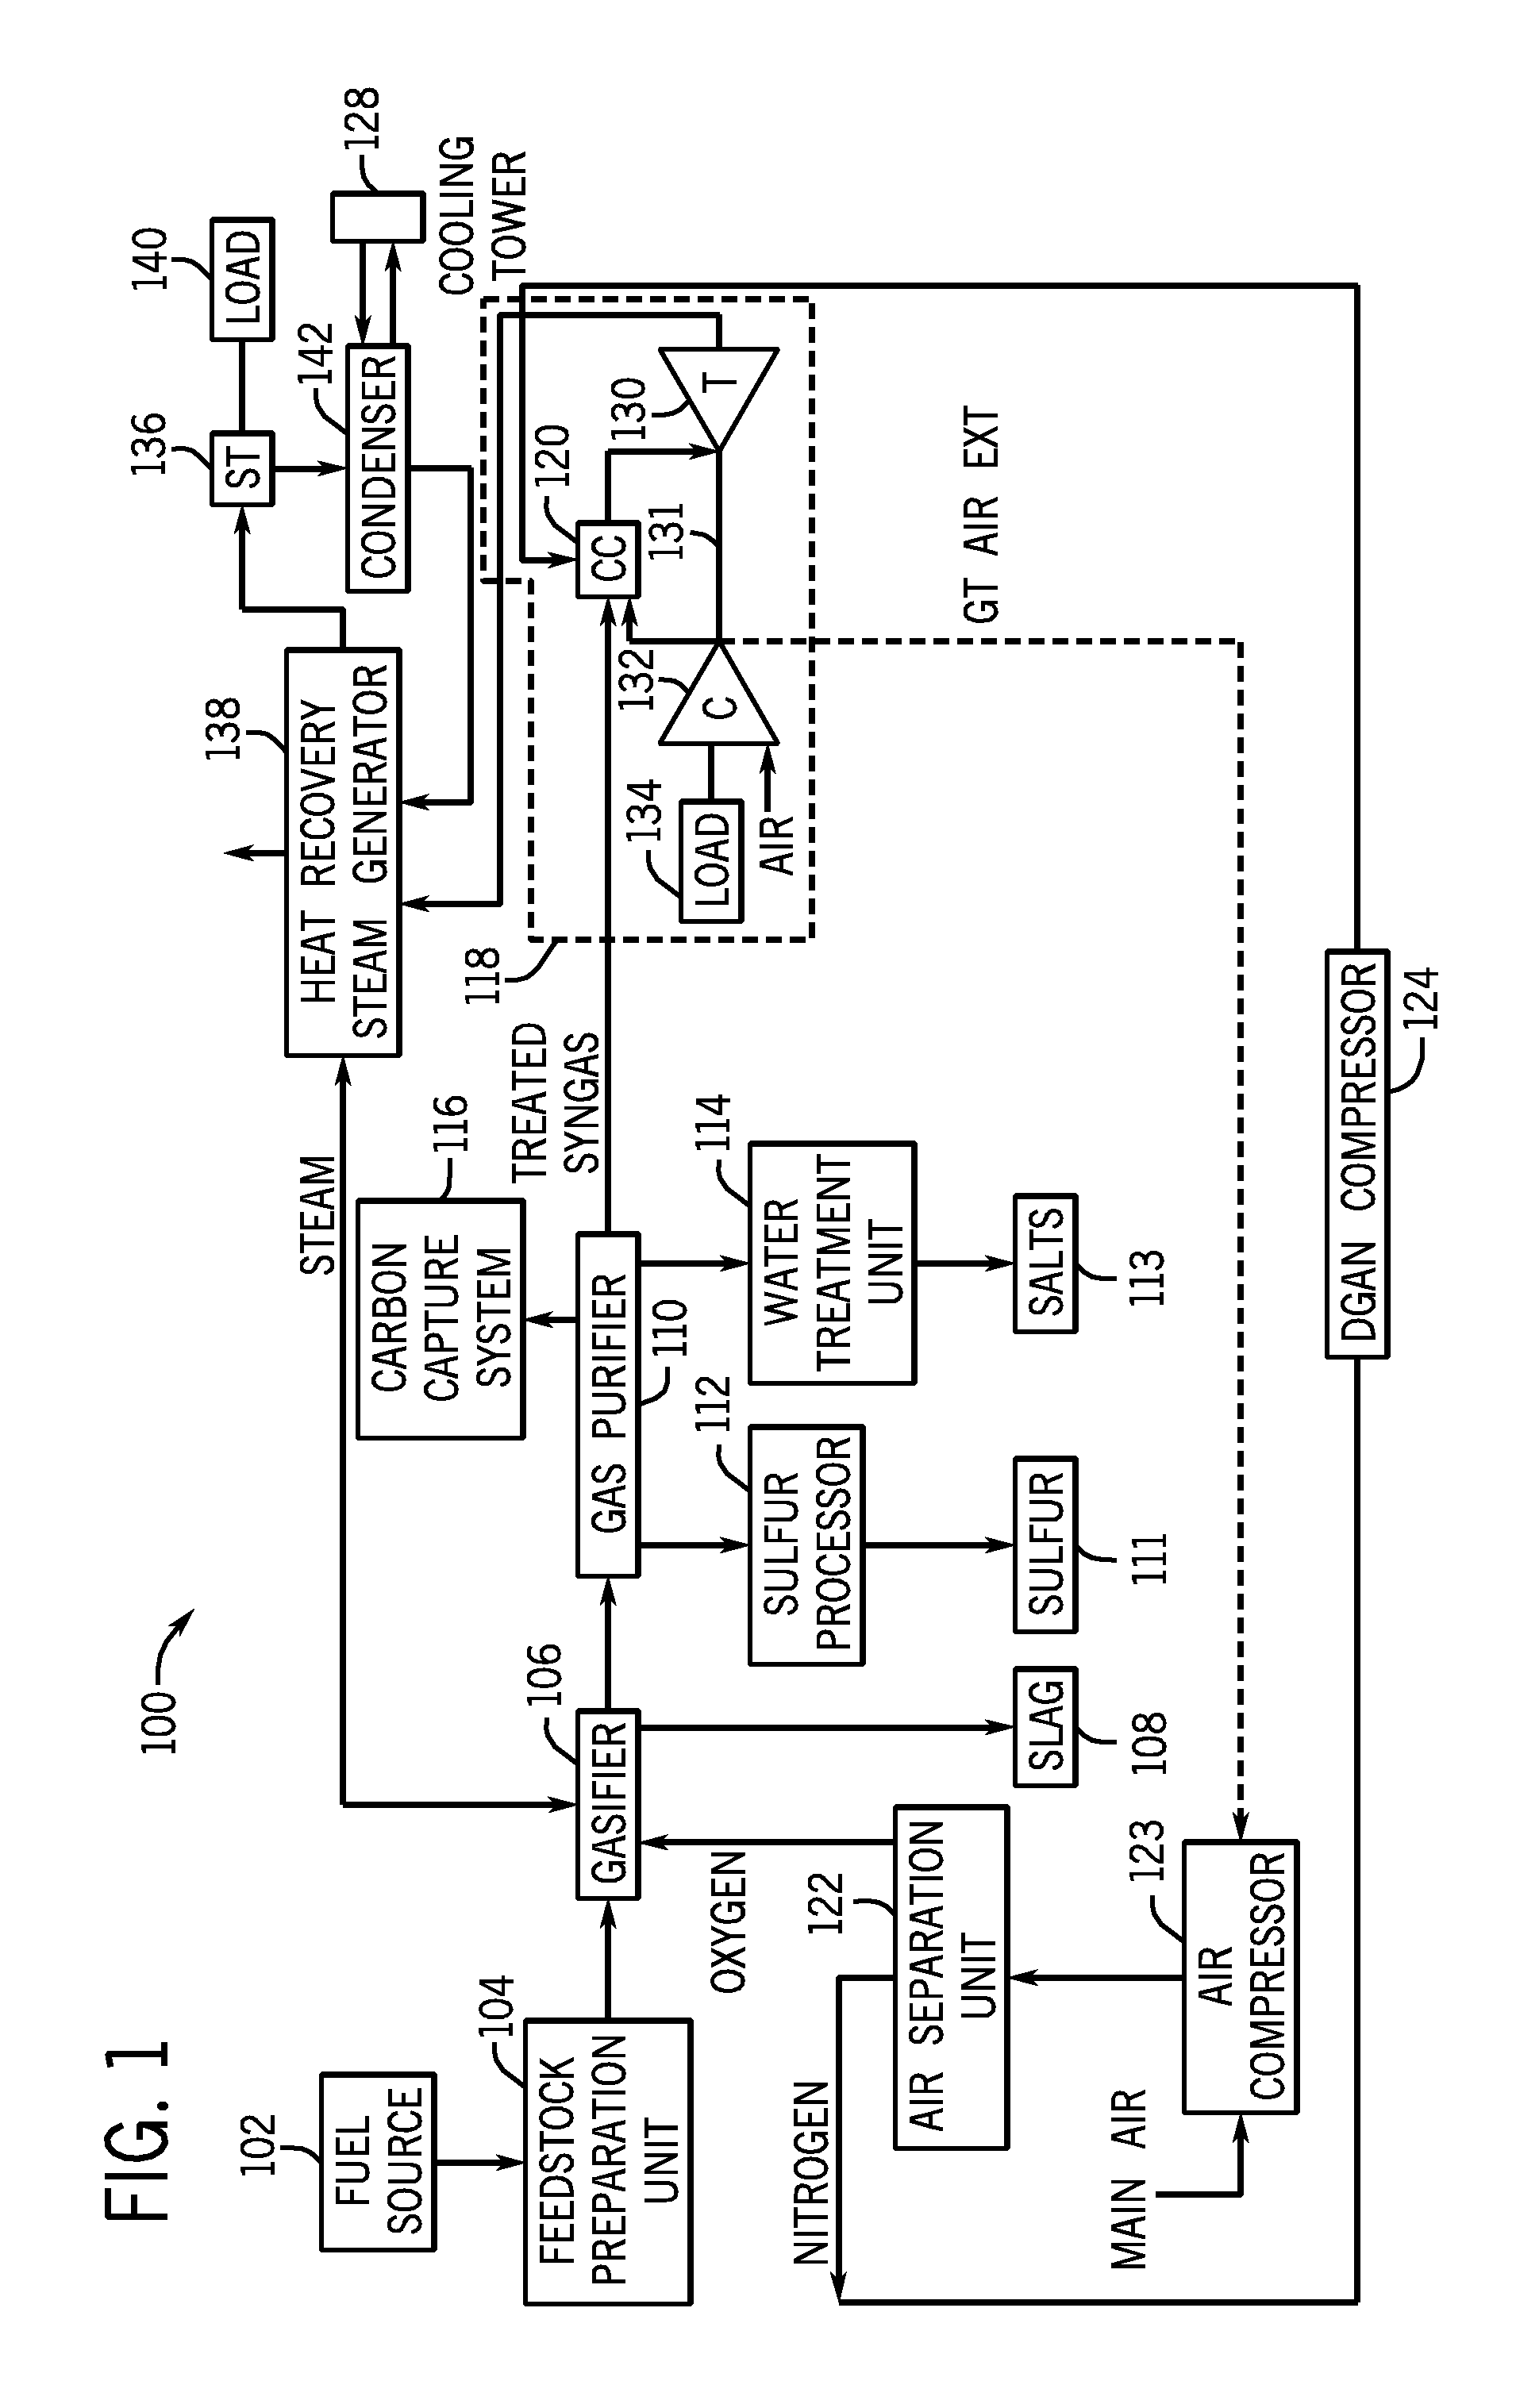 System for fuel and diluent control